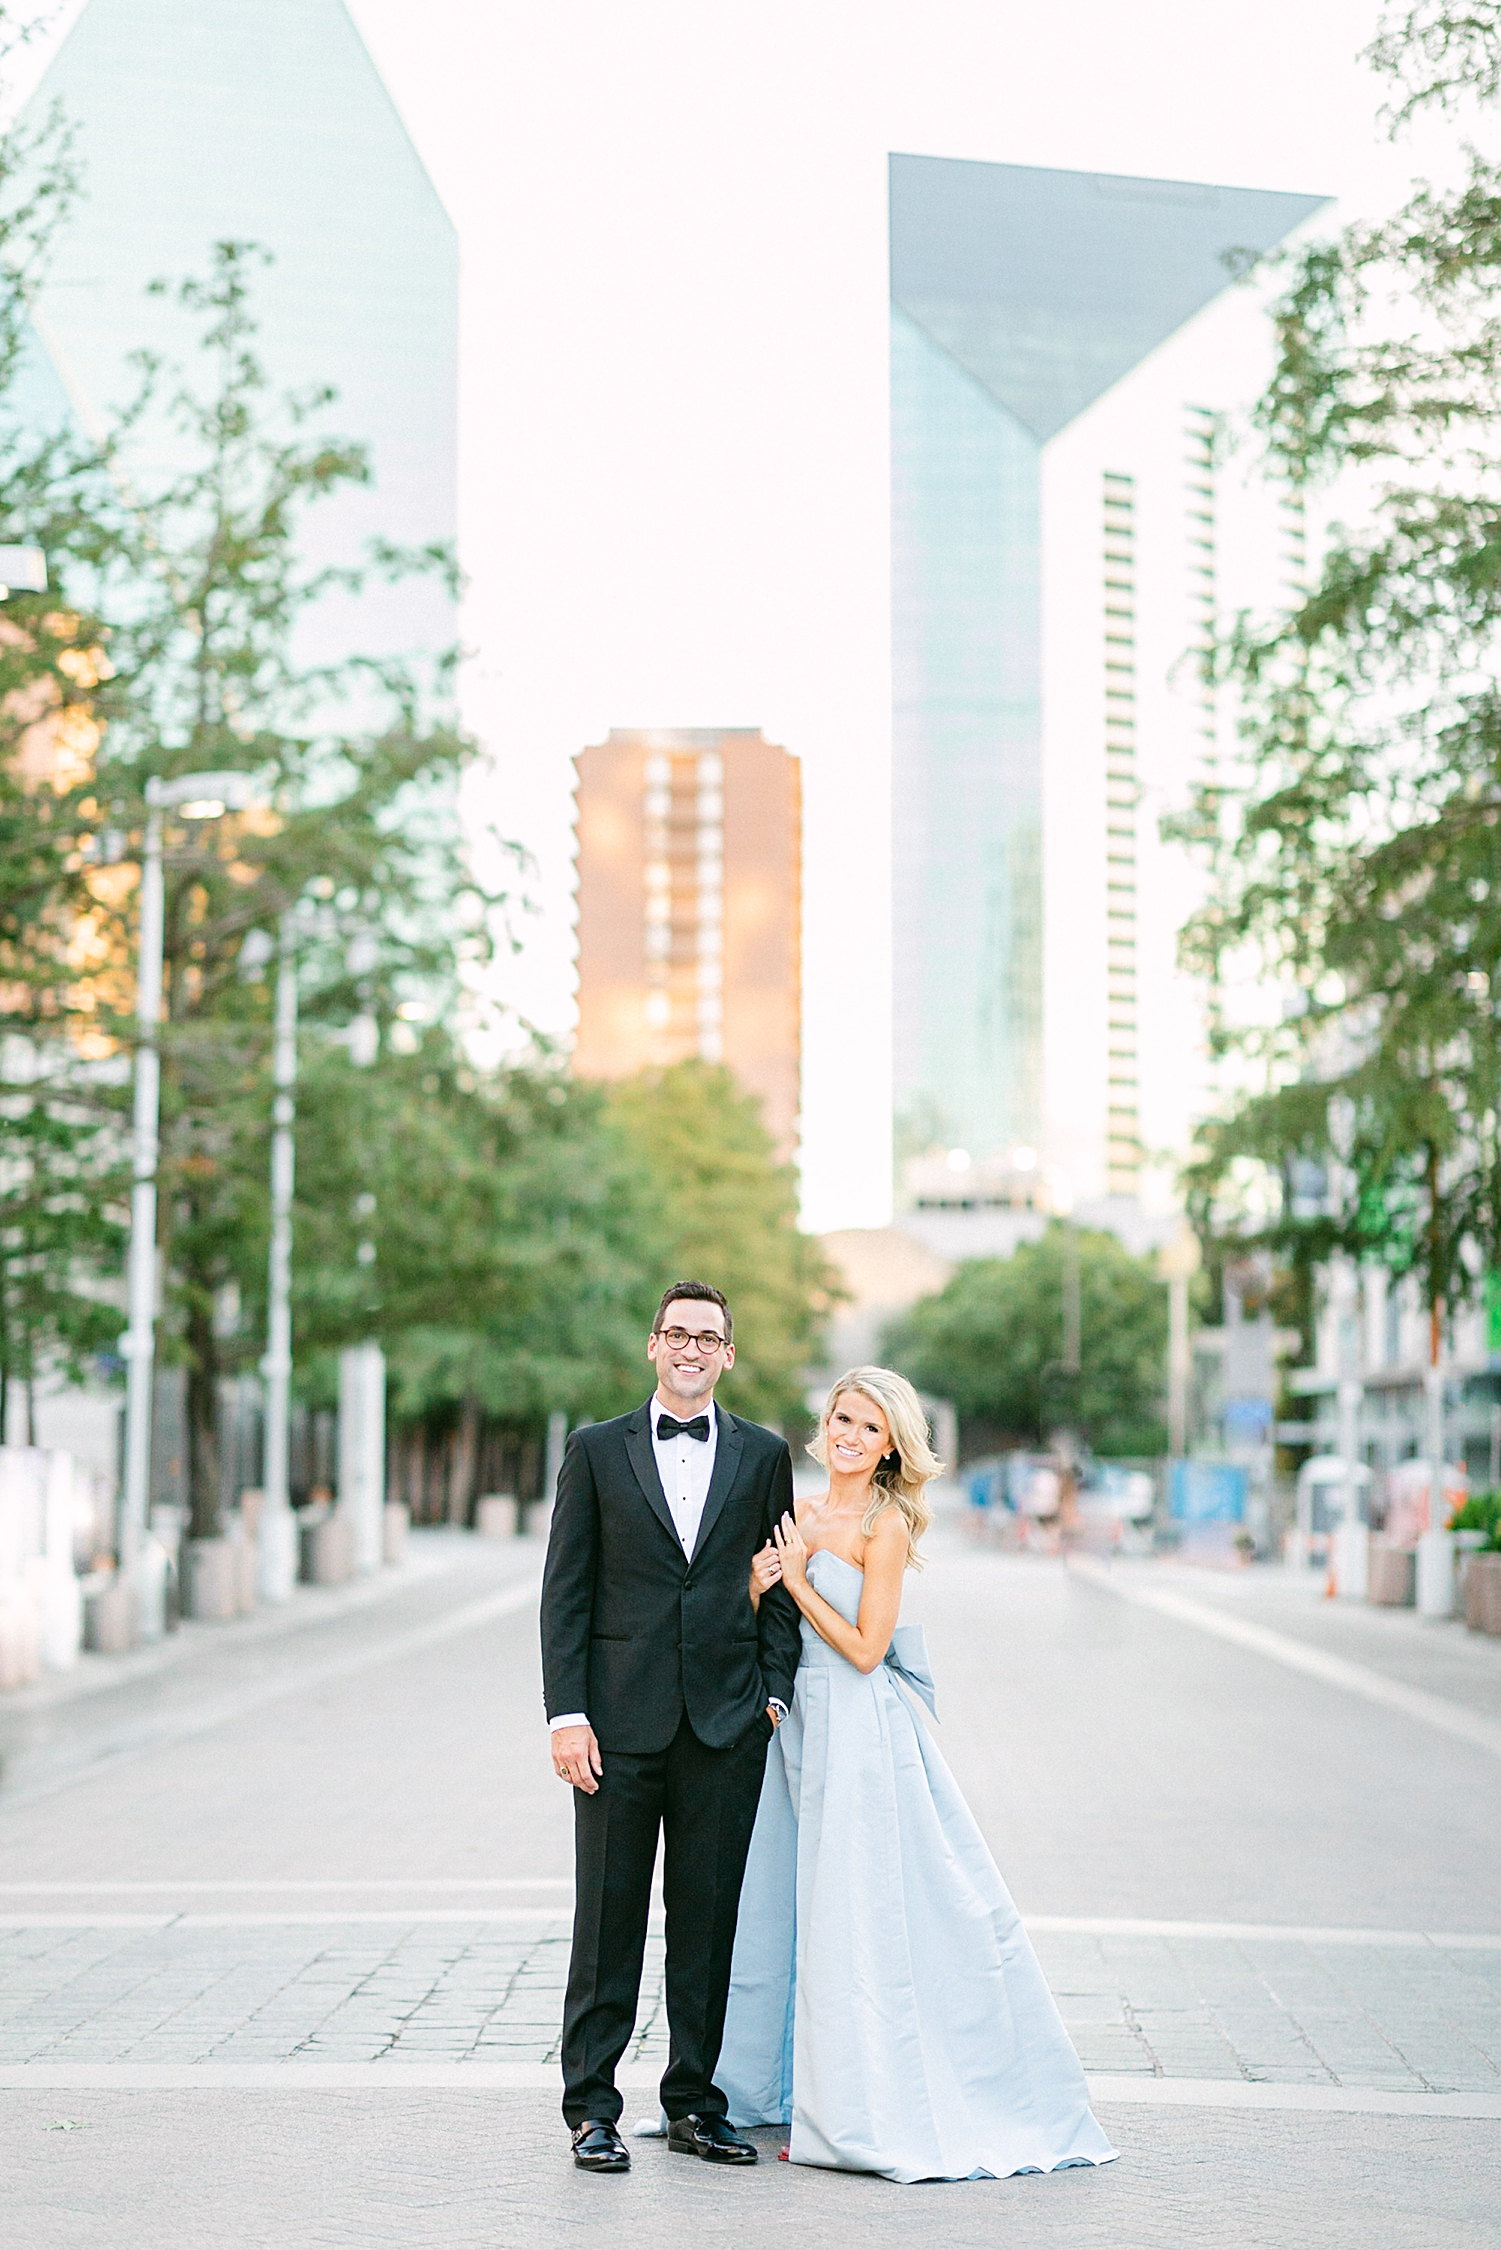 Man in black tuxedo and woman in light blue jumpsuit standing together in Dallas street